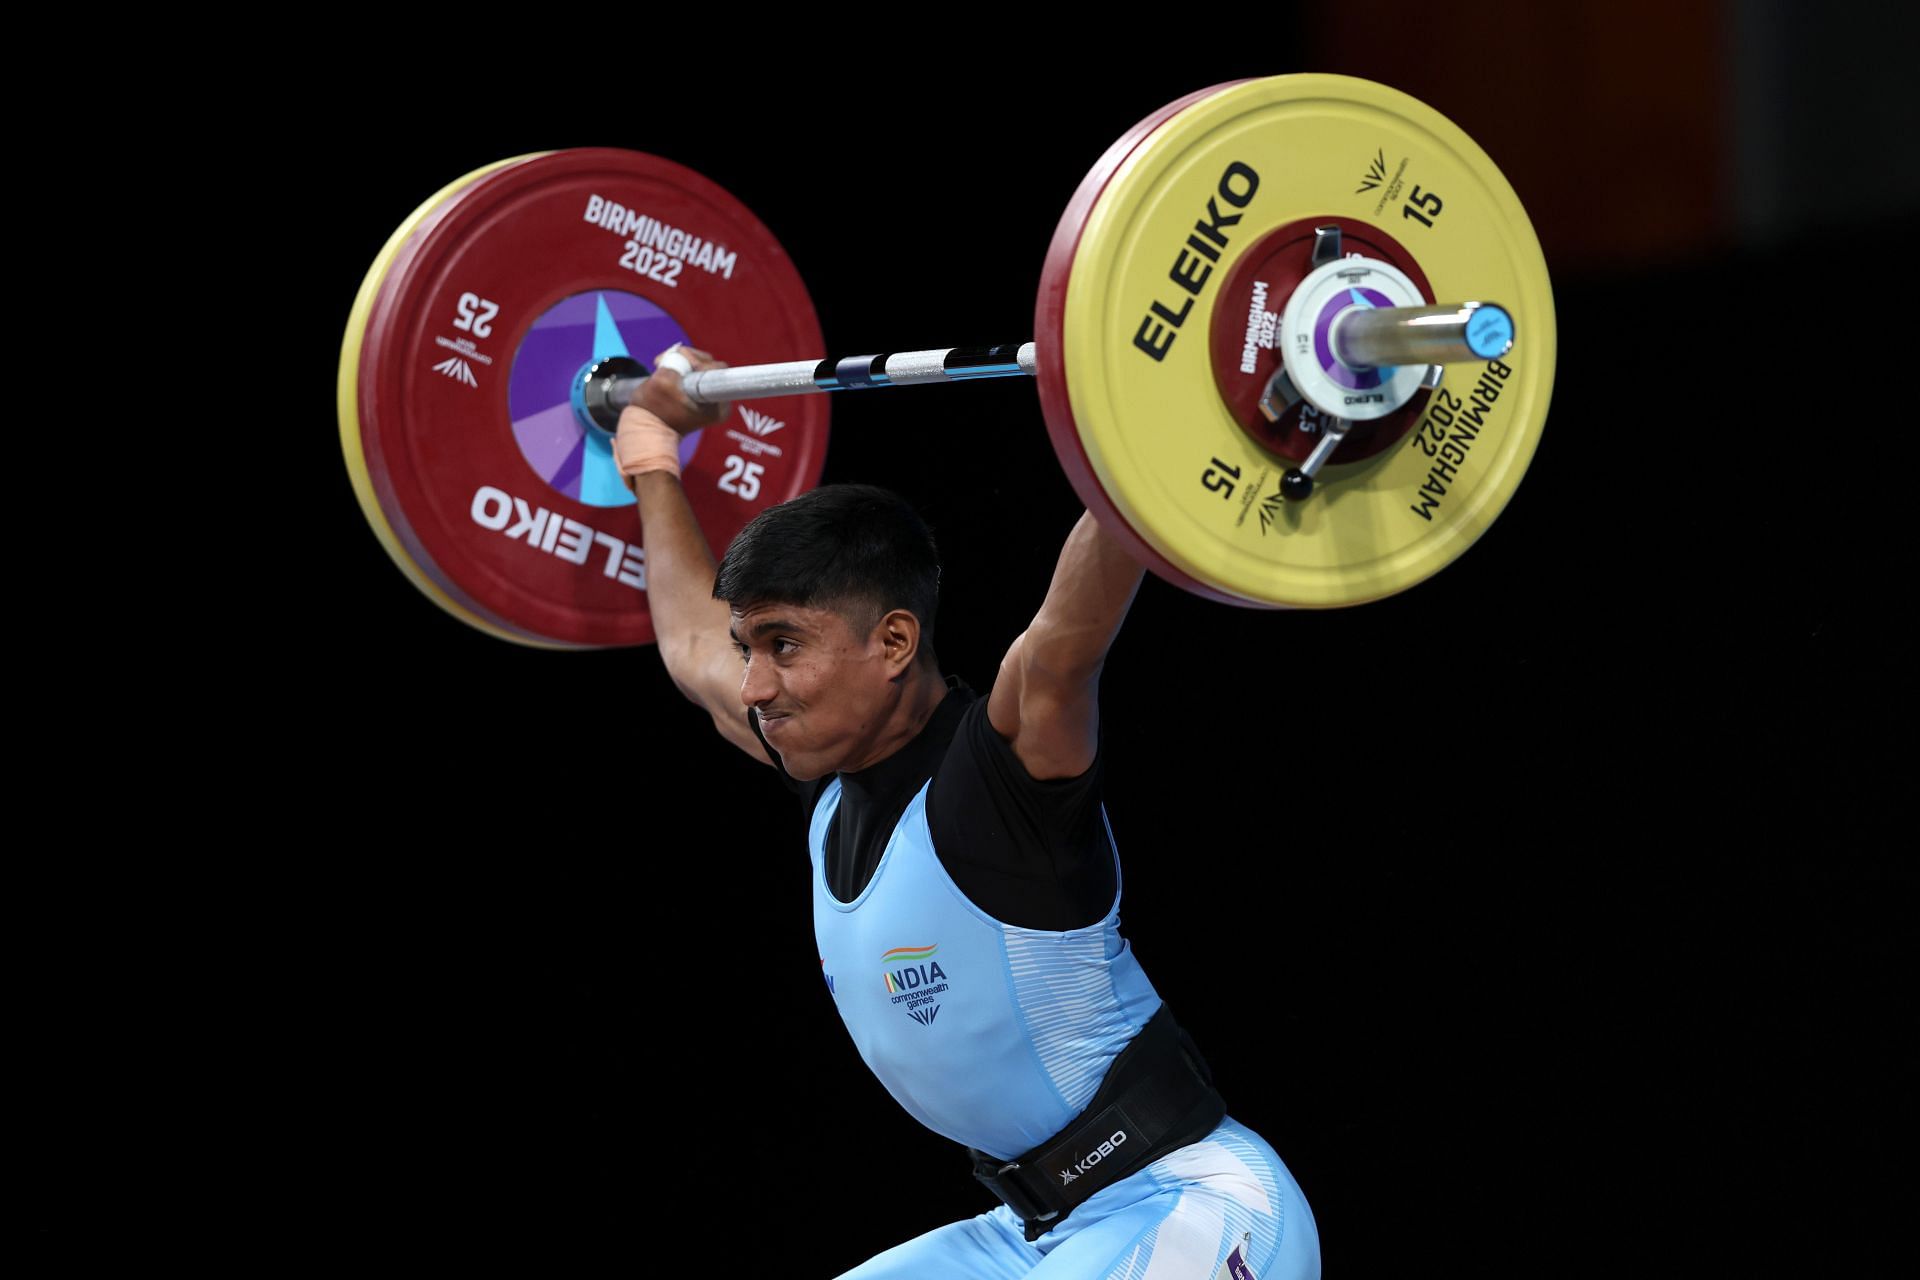 Sanket Sargar was in fine touch in the weightlifting event at CWG 2022